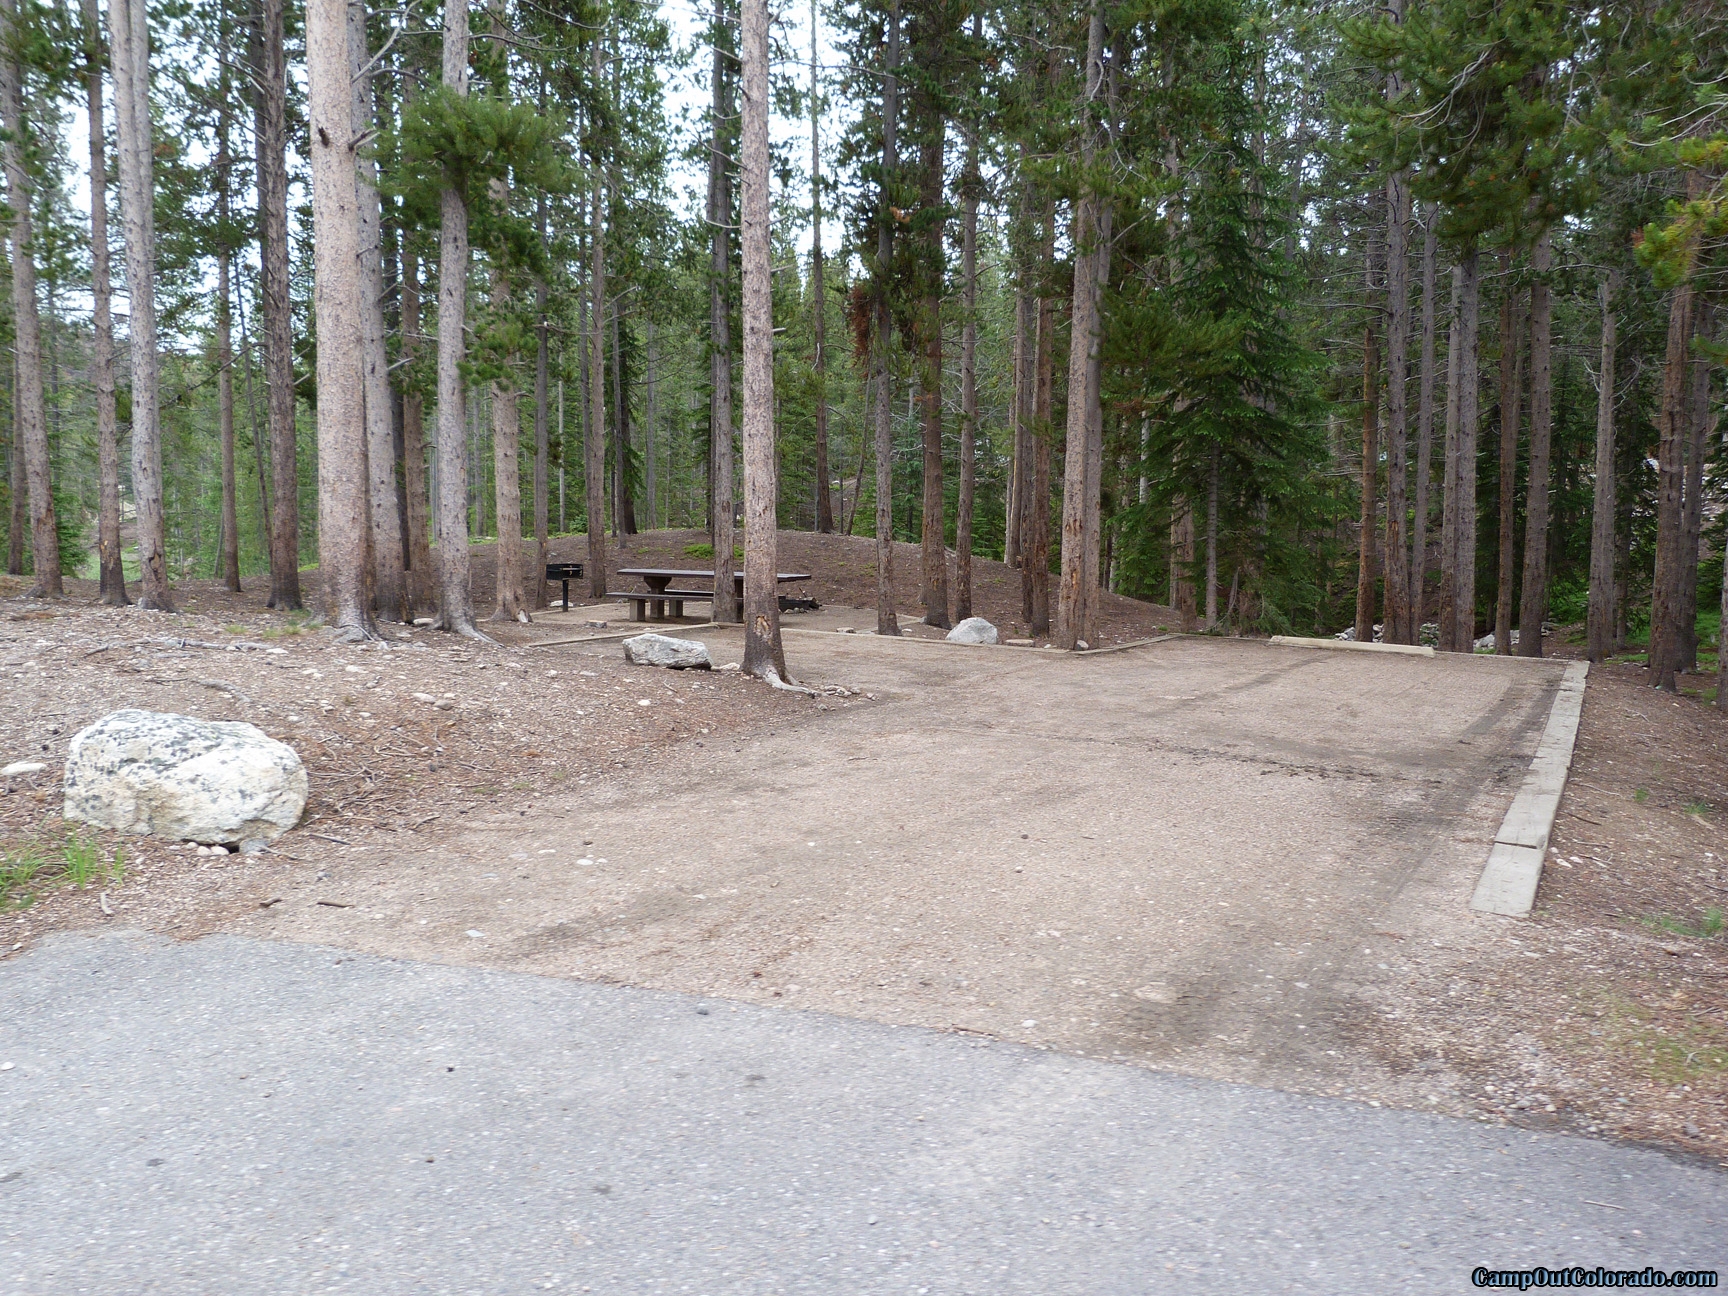 Camping Review of Chambers Lake Campground - Thick Wooded Campsite